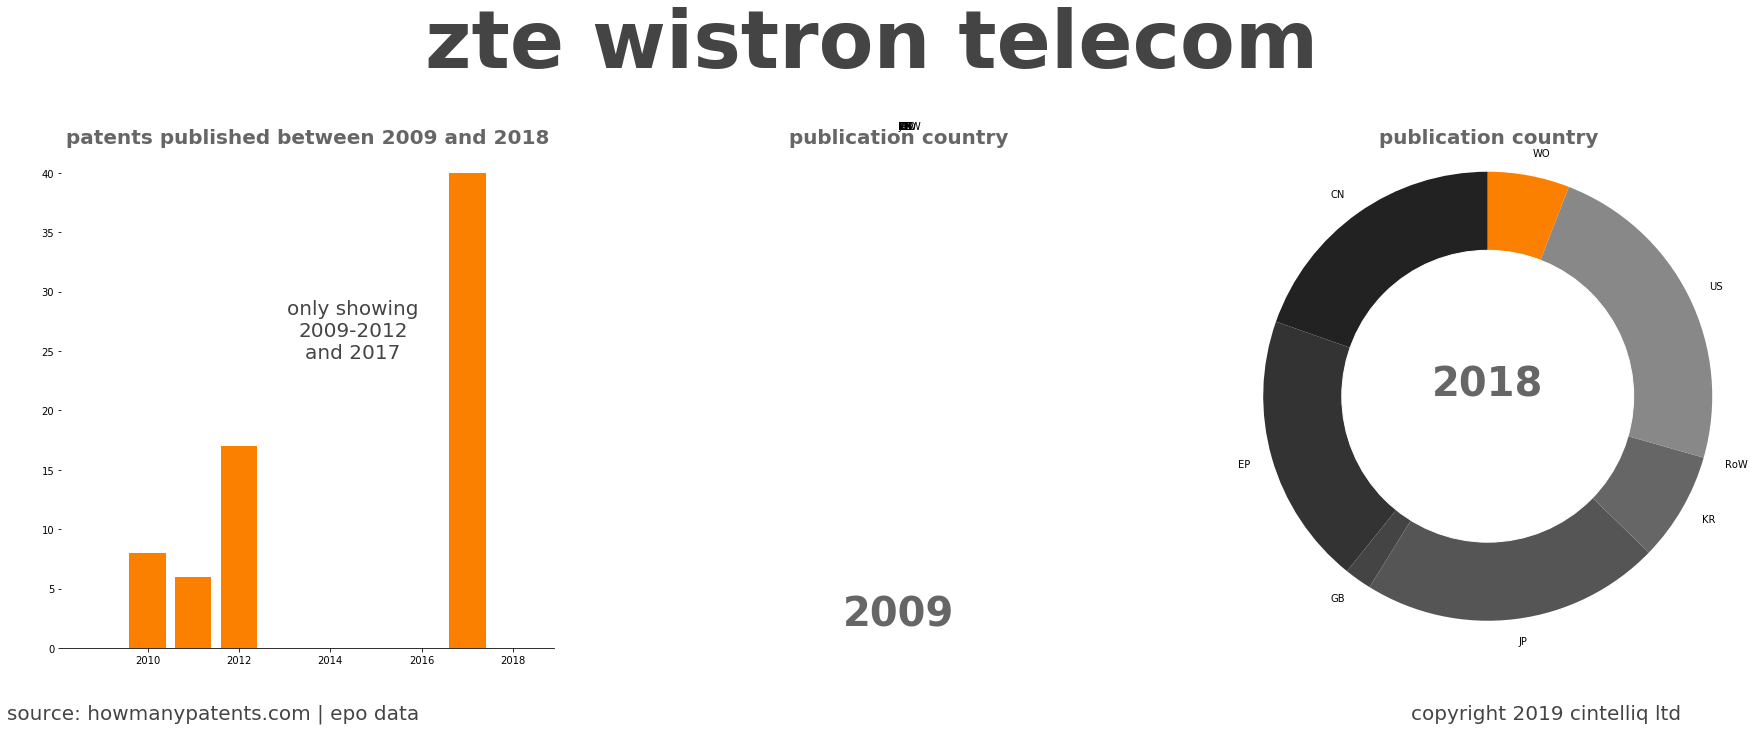 summary of patents for Zte Wistron Telecom